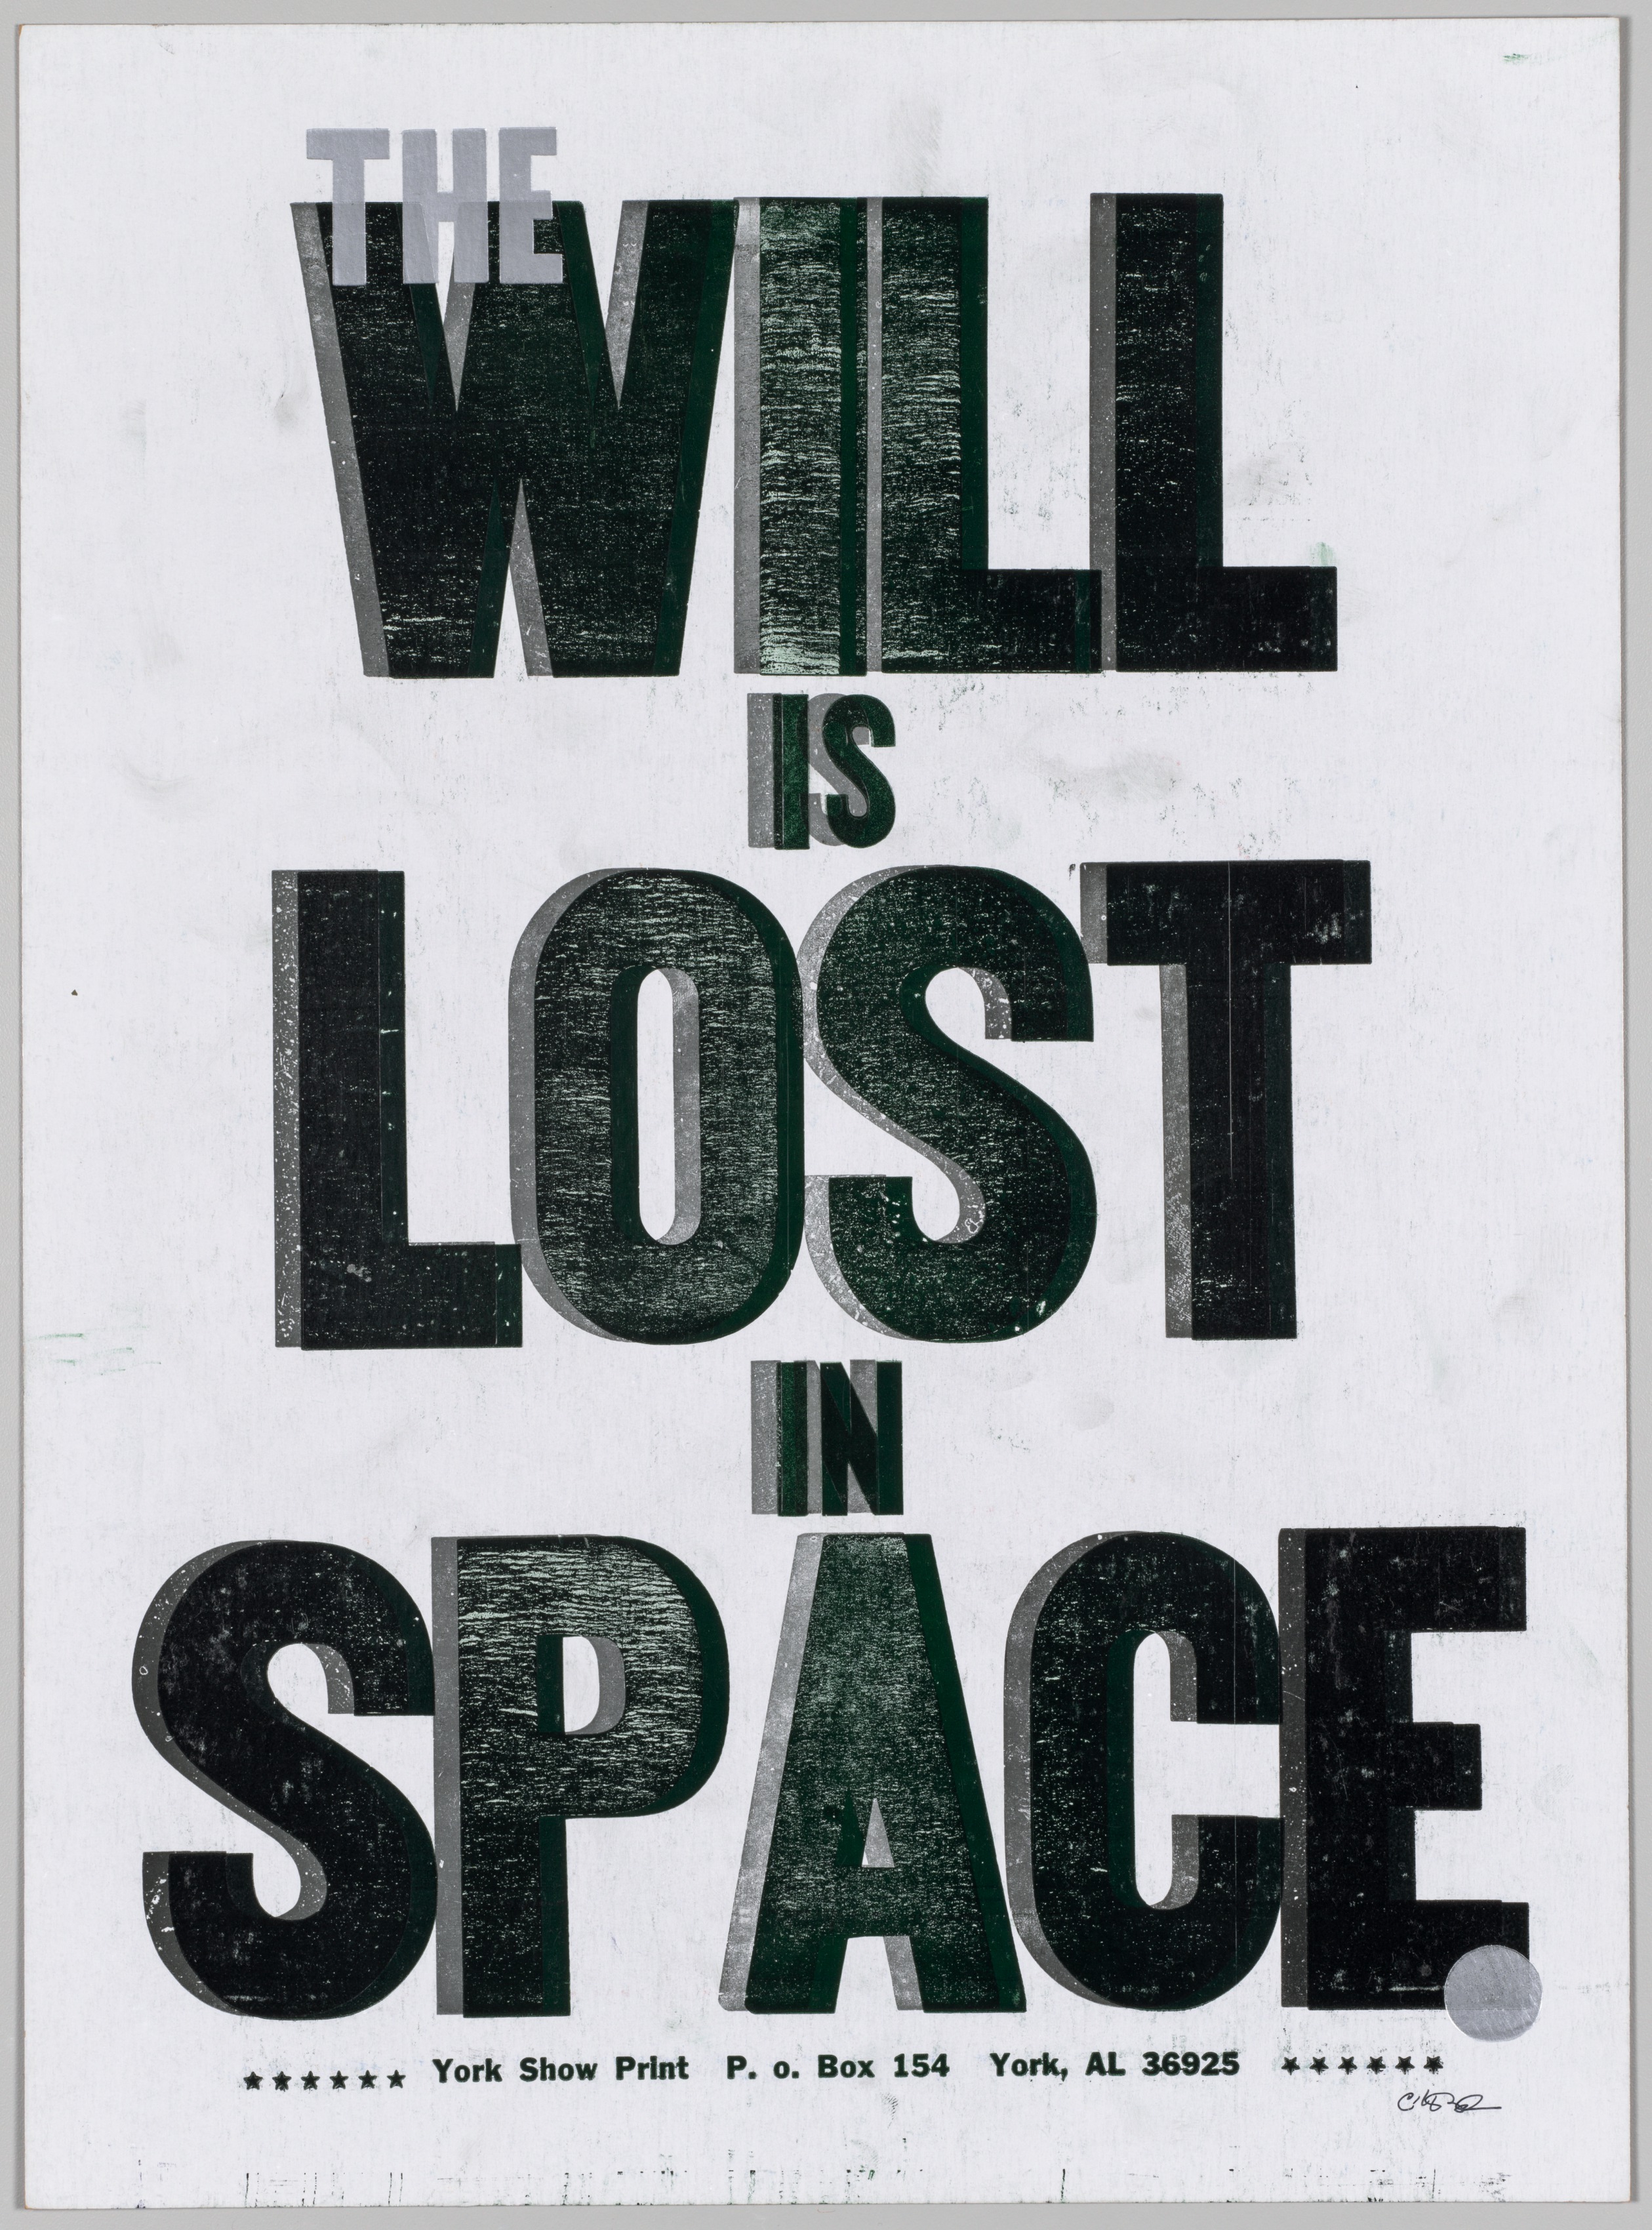 The Bad Air Smelled of Roses: The Will is Lost in Space